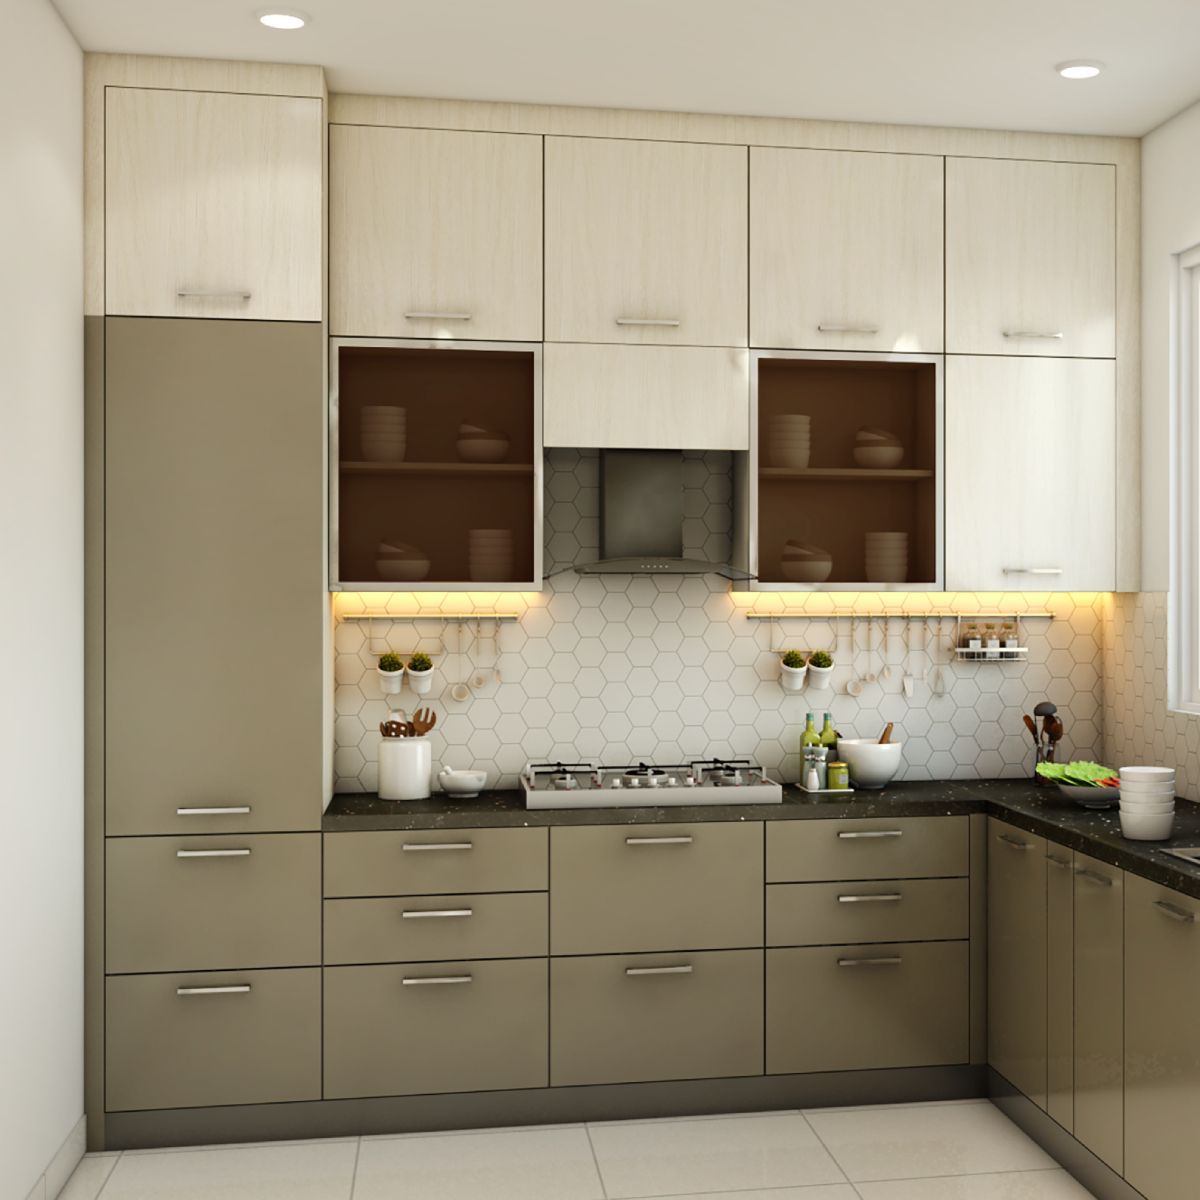 Modern L-Shaped Kitchen Design With Profiled Cove Light